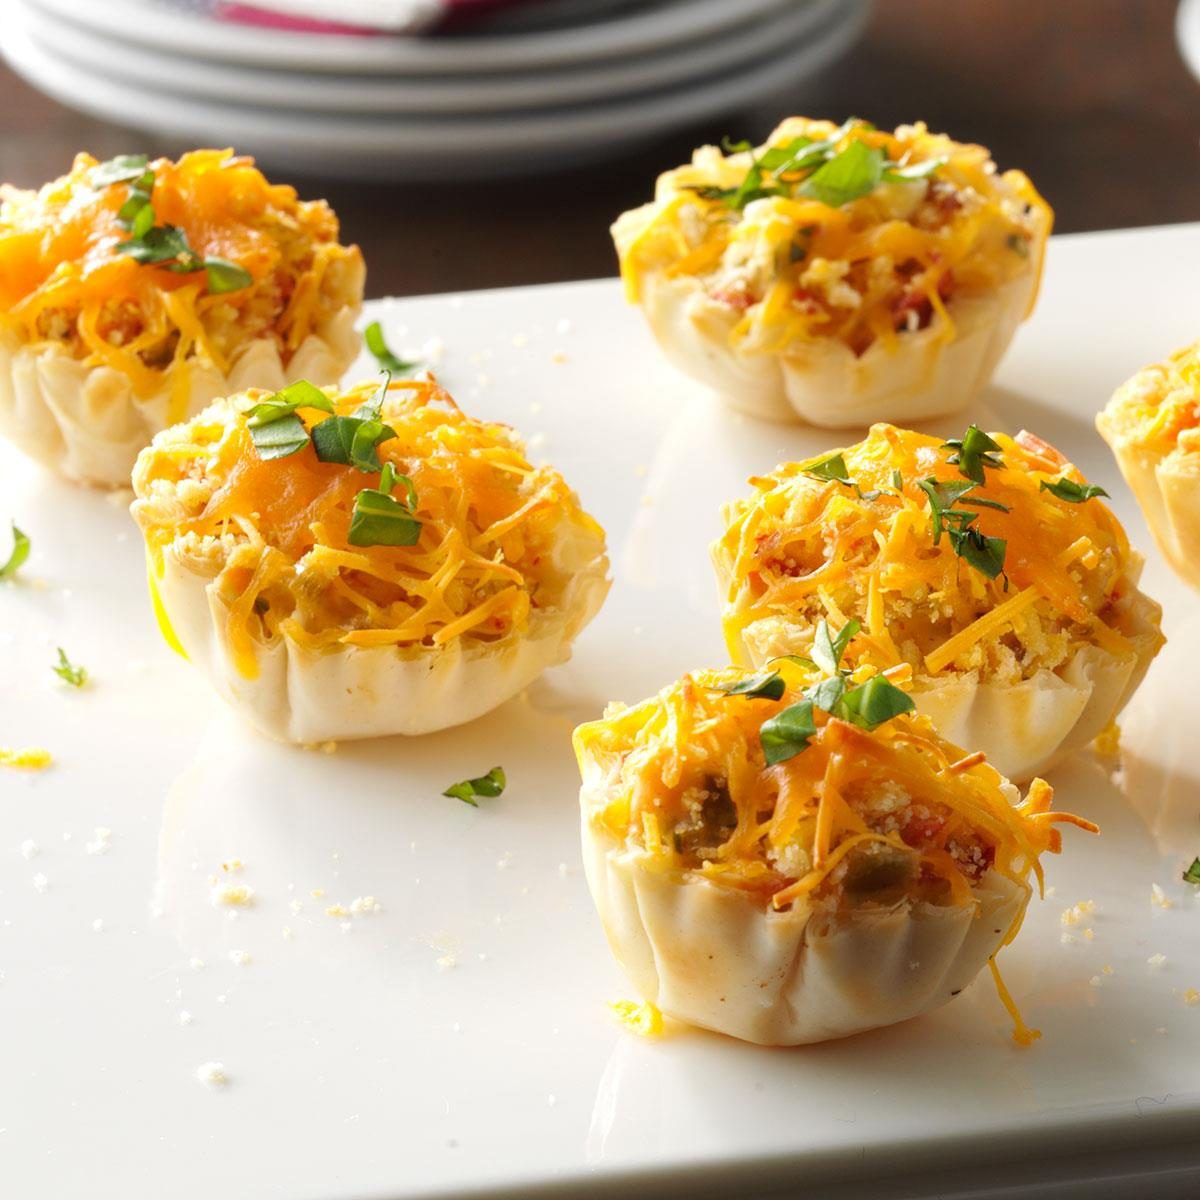 <p>Frozen mini phyllo tart shells are so convenient and easy to use. Just add a savory filling featuring sun-dried tomatoes and bacon, then pop them in the oven.—Patricia Quinn, Omaha, Nebraska</p> <div class="listicle-page__buttons"> <div class="listicle-page__cta-button"><a href='https://www.tasteofhome.com/recipes/bacon-sun-dried-tomato-phyllo-tarts/'>Go to Recipe</a></div> </div>